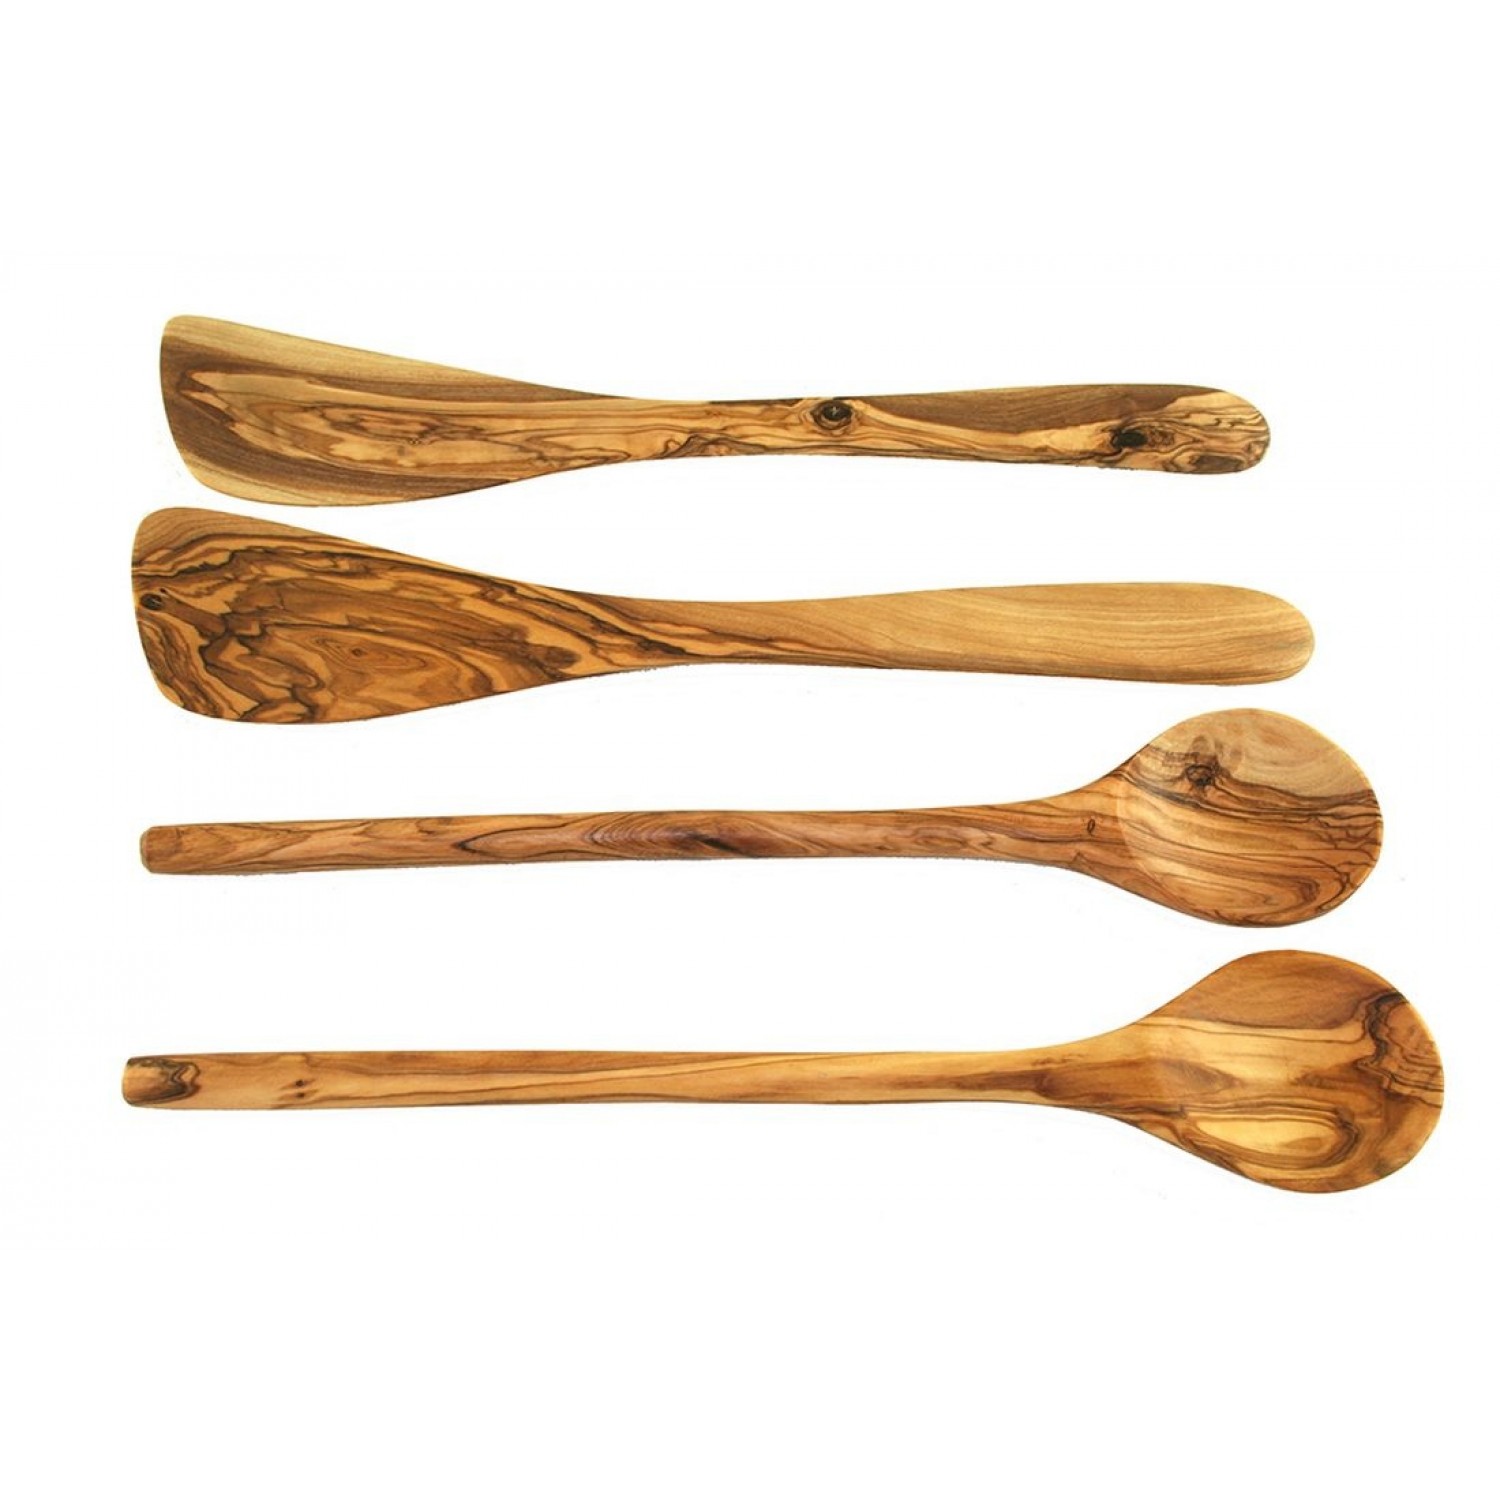 D.O.M. 2x2 Olive Wood Cooking Tool Set, Spatula & Cooking Spoon